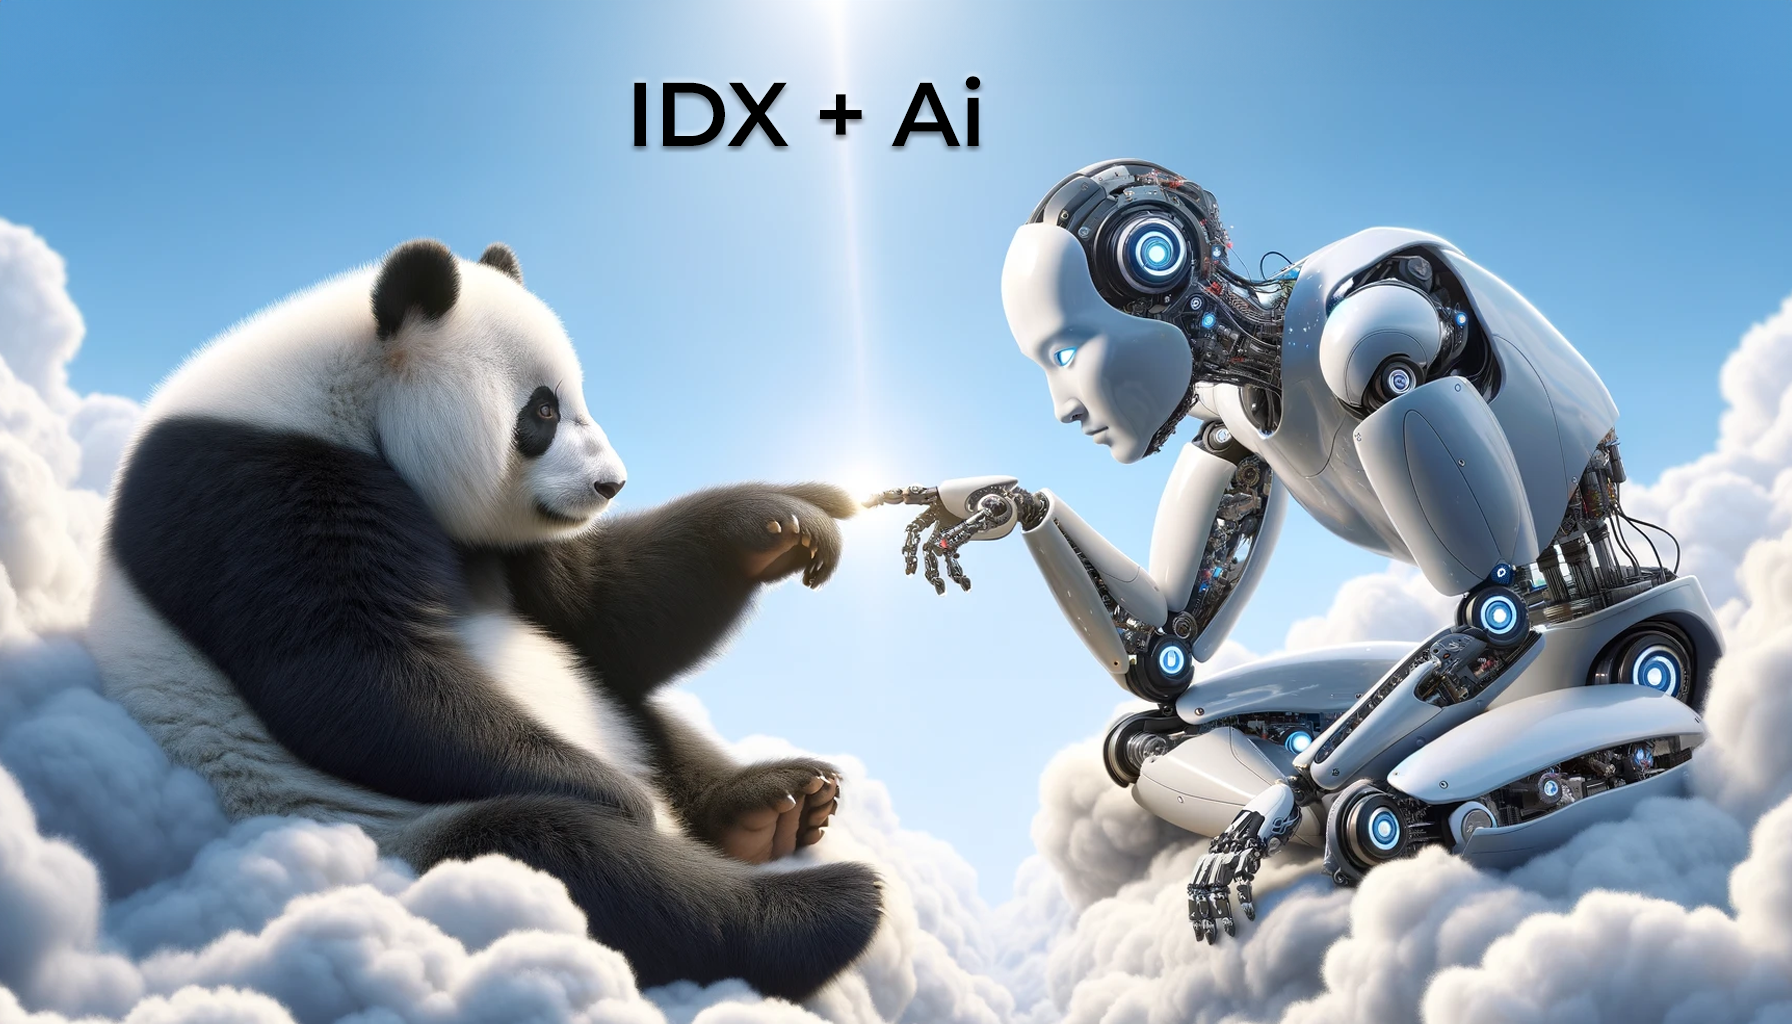 featured image for story, AIDX vs IDX: The Future of Real Estate Search - AI-Powered IDX